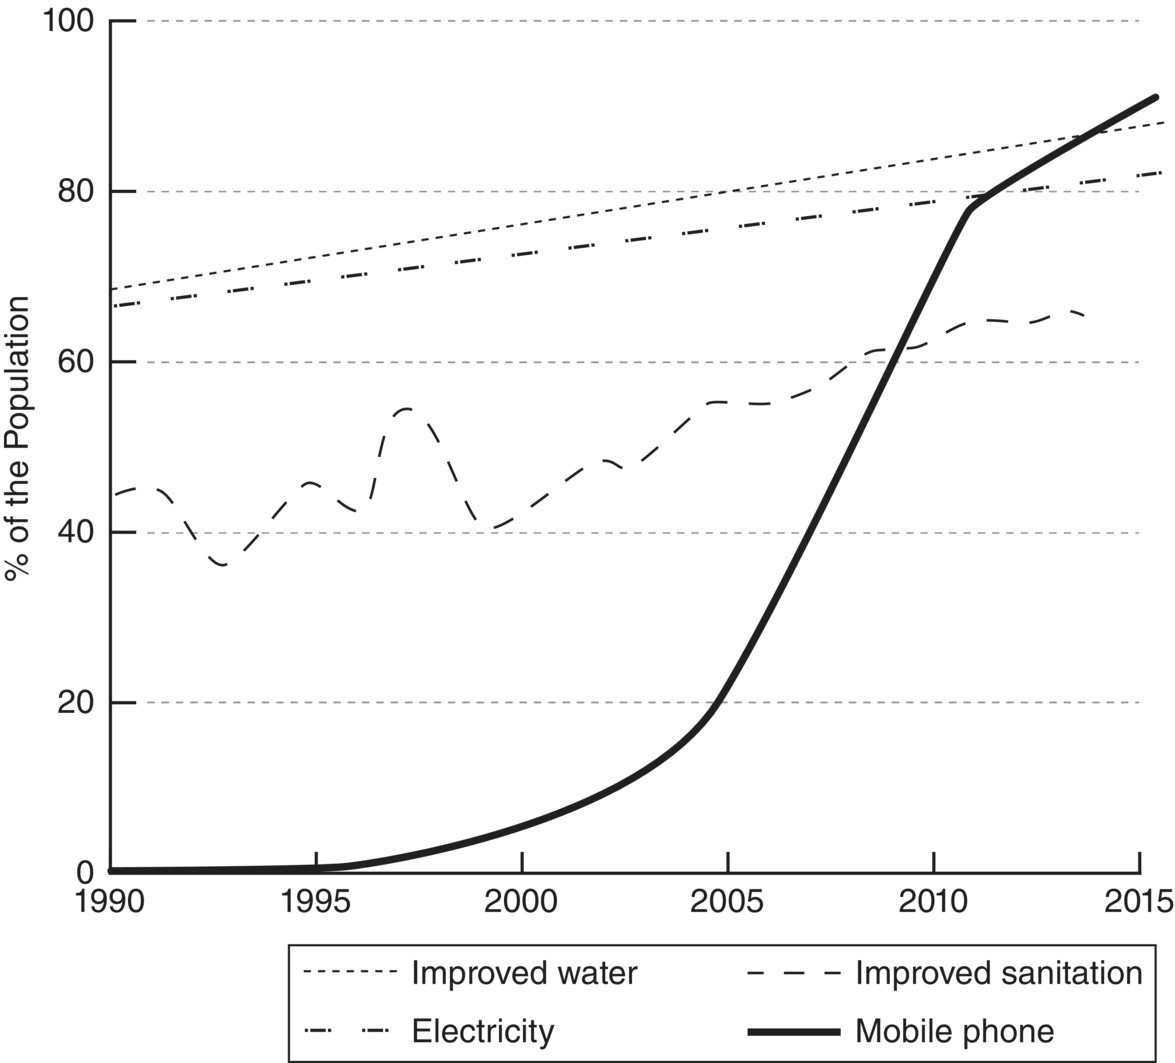 Graph of % of the population vs. years (1990–2015) with 2 ascending lines for improved water (dotted) and electricity (dash-dotted) and 2 ascending curves for improved sanitation (dashed) and mobile phone (solid).